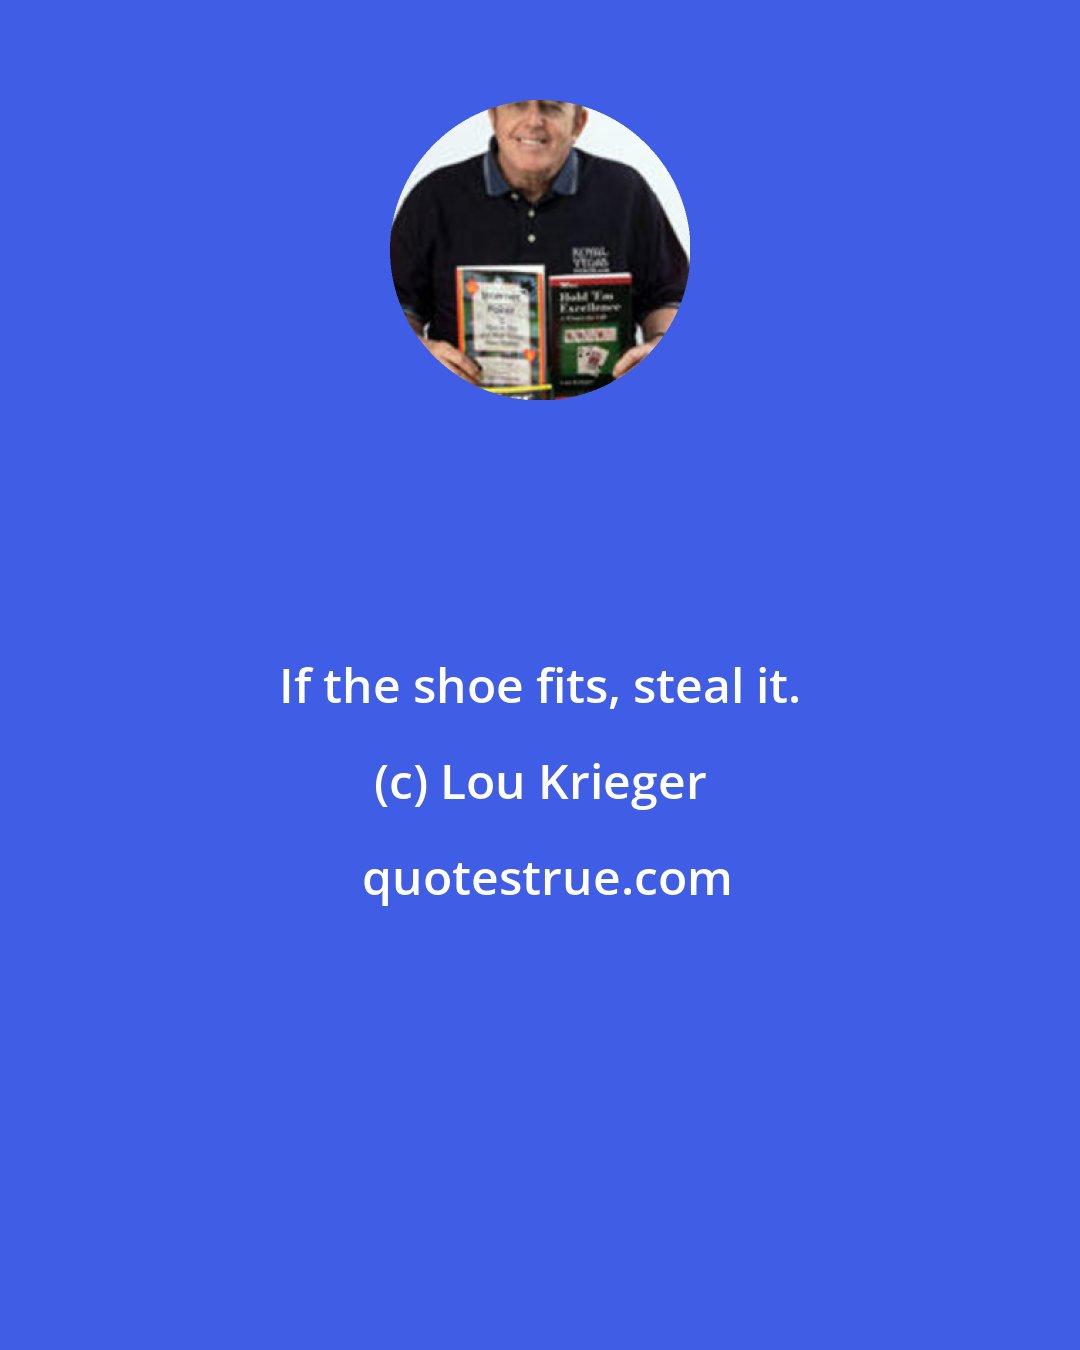 Lou Krieger: If the shoe fits, steal it.